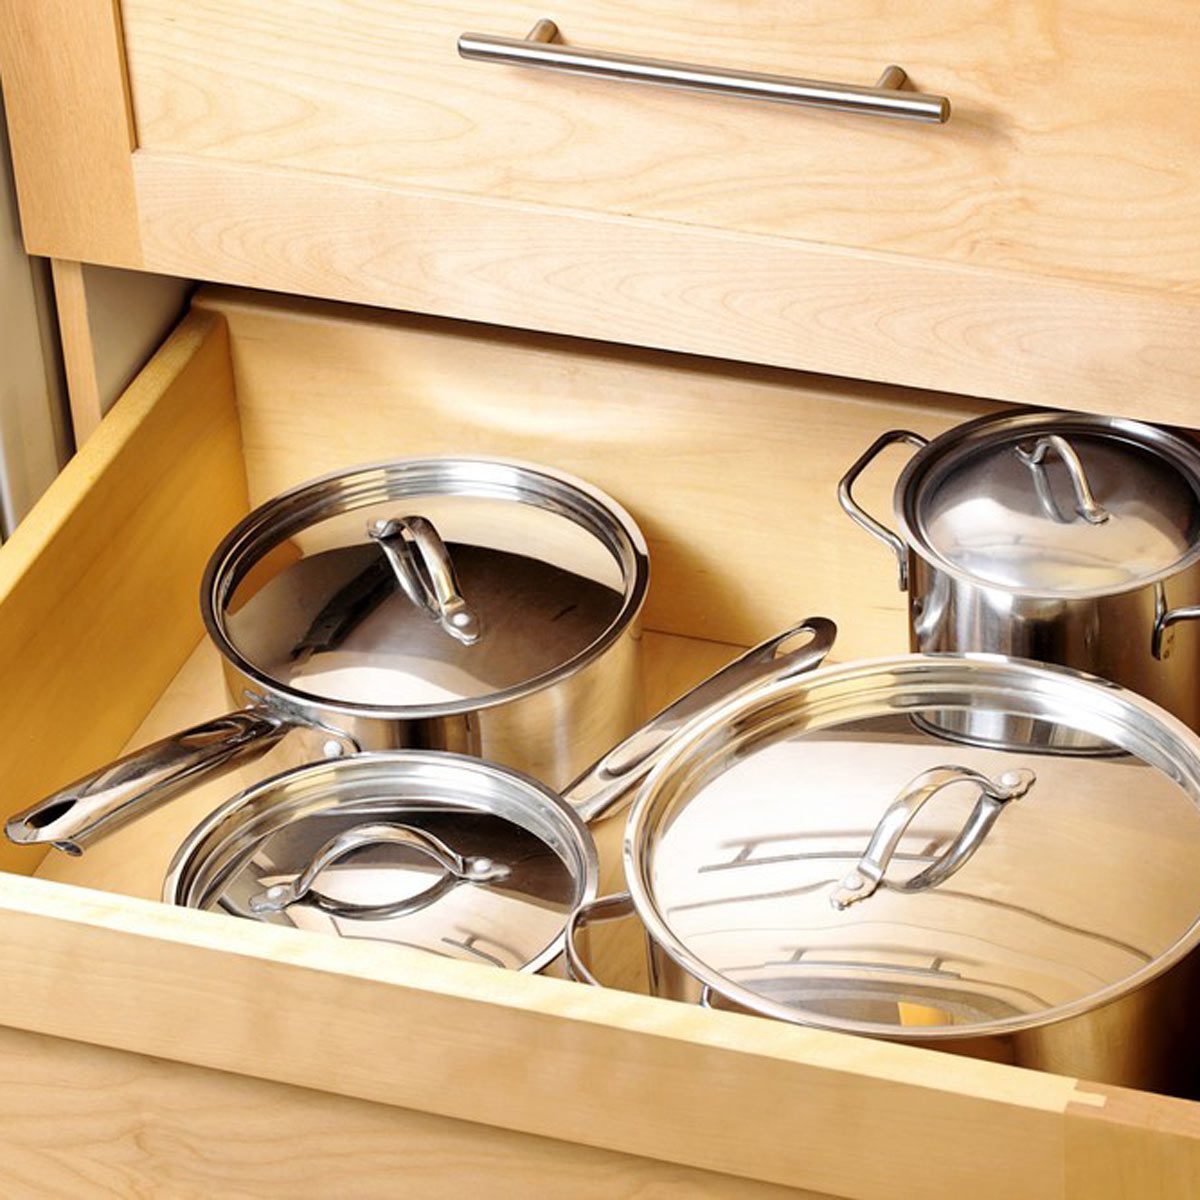 27 Incredible Kitchen Storage Tips and Tricks